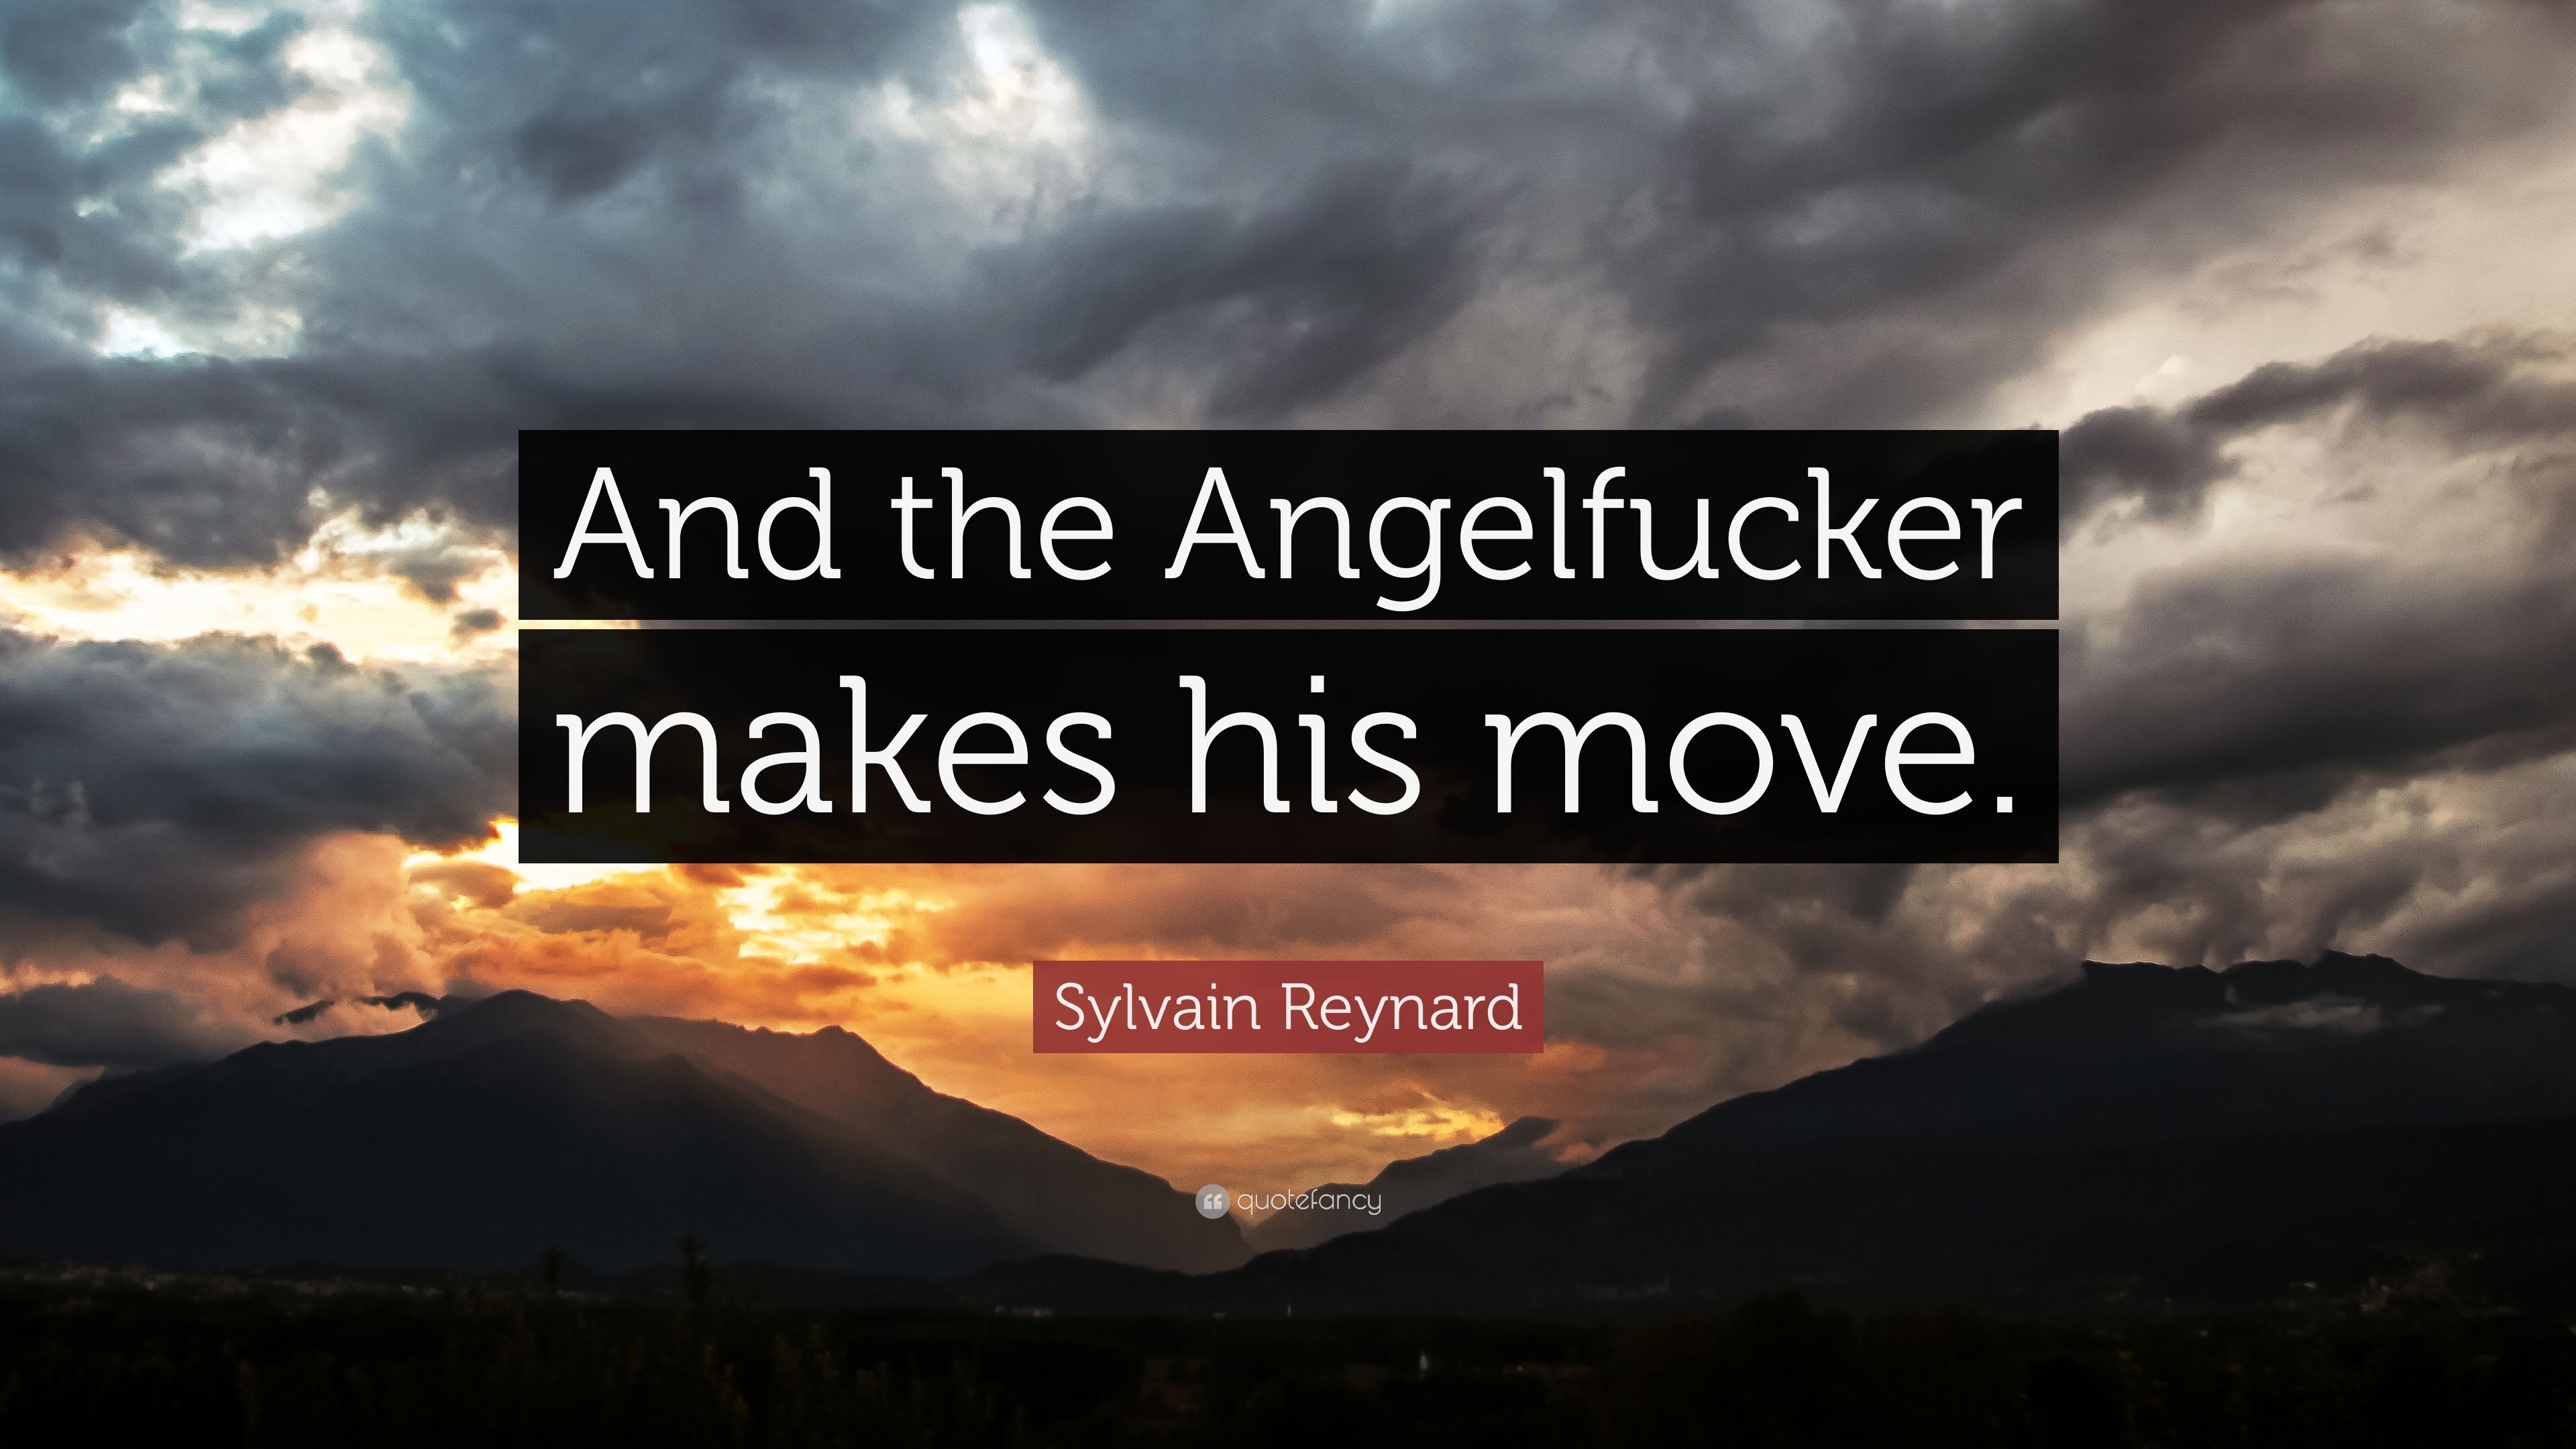 Sylvain Reynard Quote: “And the Angelf*cker makes his move.” 7